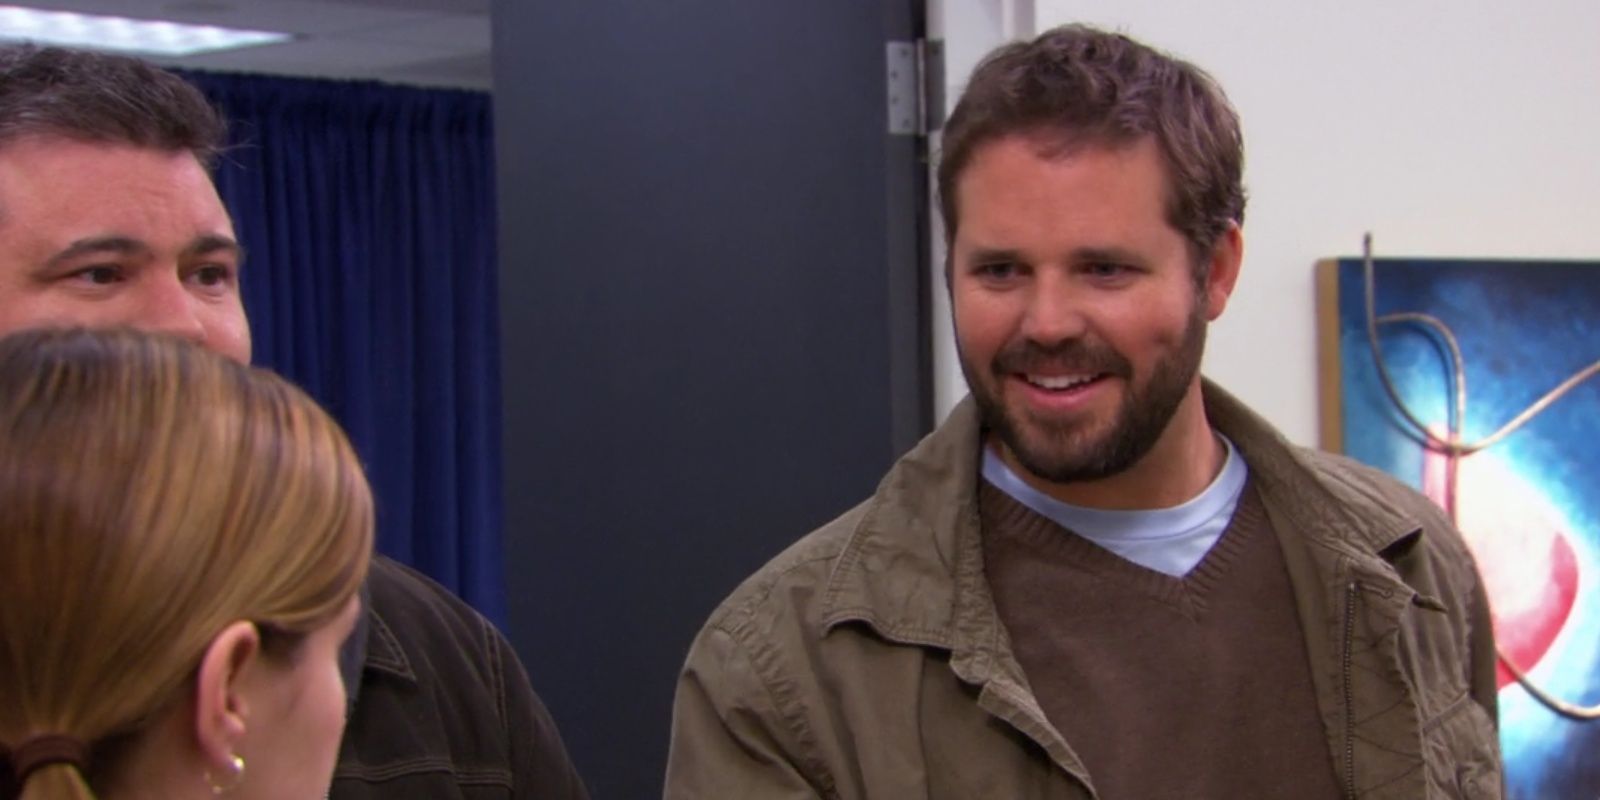 Roy comes to Pam's art show with his brother The Office